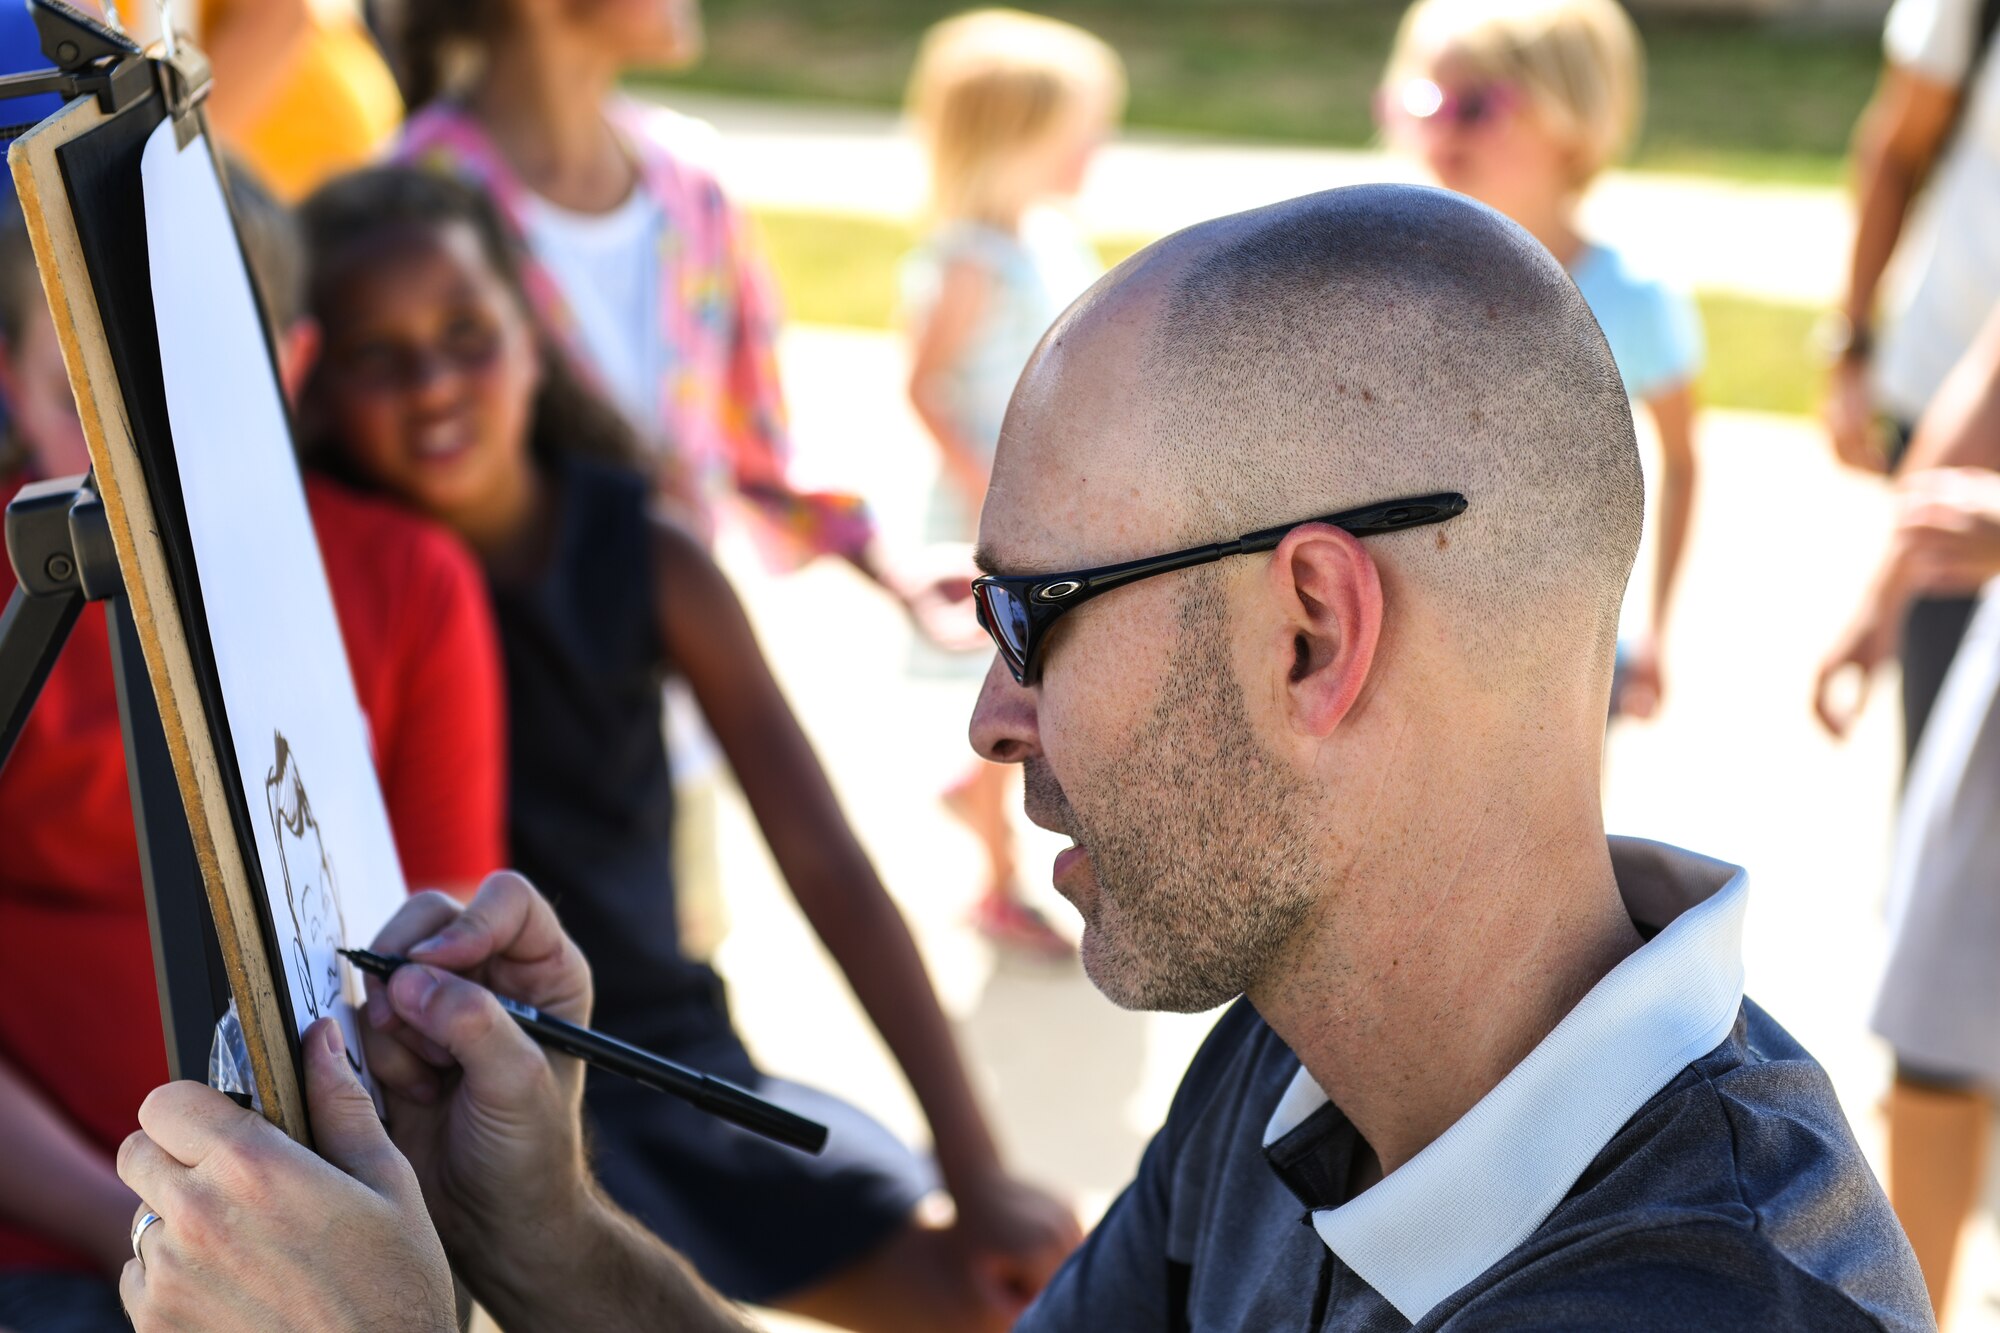 Jason Sauer, a denver caricatures artist, draws a sketch during the National Night Out event, Aug. 6, 2019, on Buckley Air Force Base, Colo. Sauer has 20 years of
caricature drawings experience and does many events around the colorado area. (U.S. Air
Force photo by Airman Andrew I. Garavito)